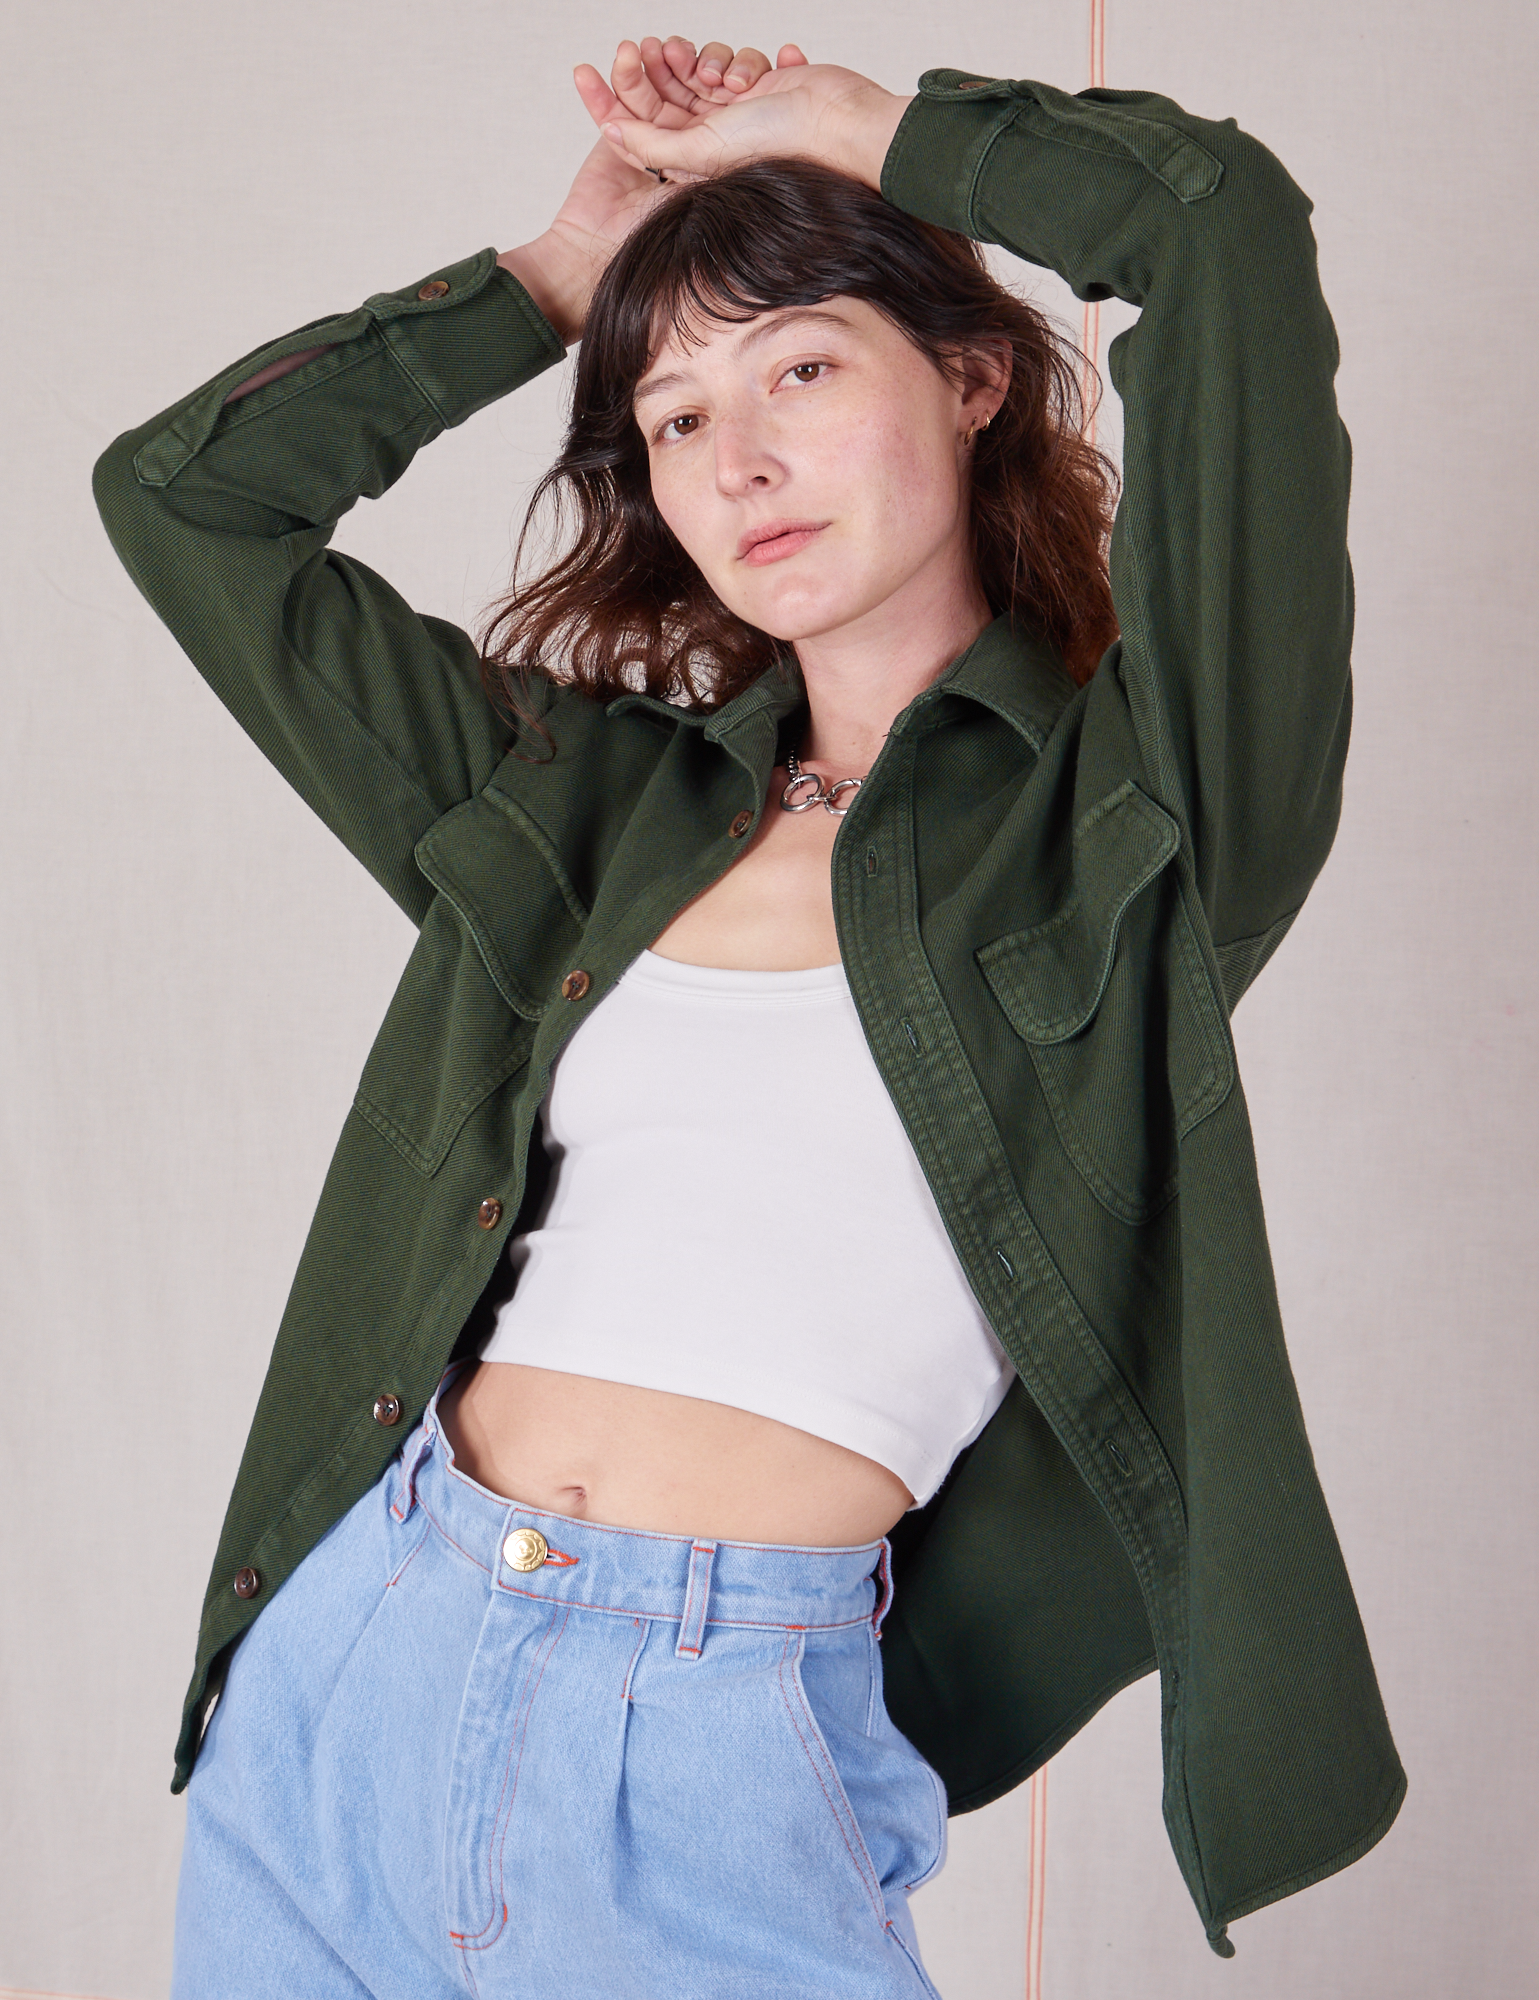 Alex is wearing Flannel Overshirt in Swamp Green, vintage off-white Cropped Cami and light wash Trouser Jeans